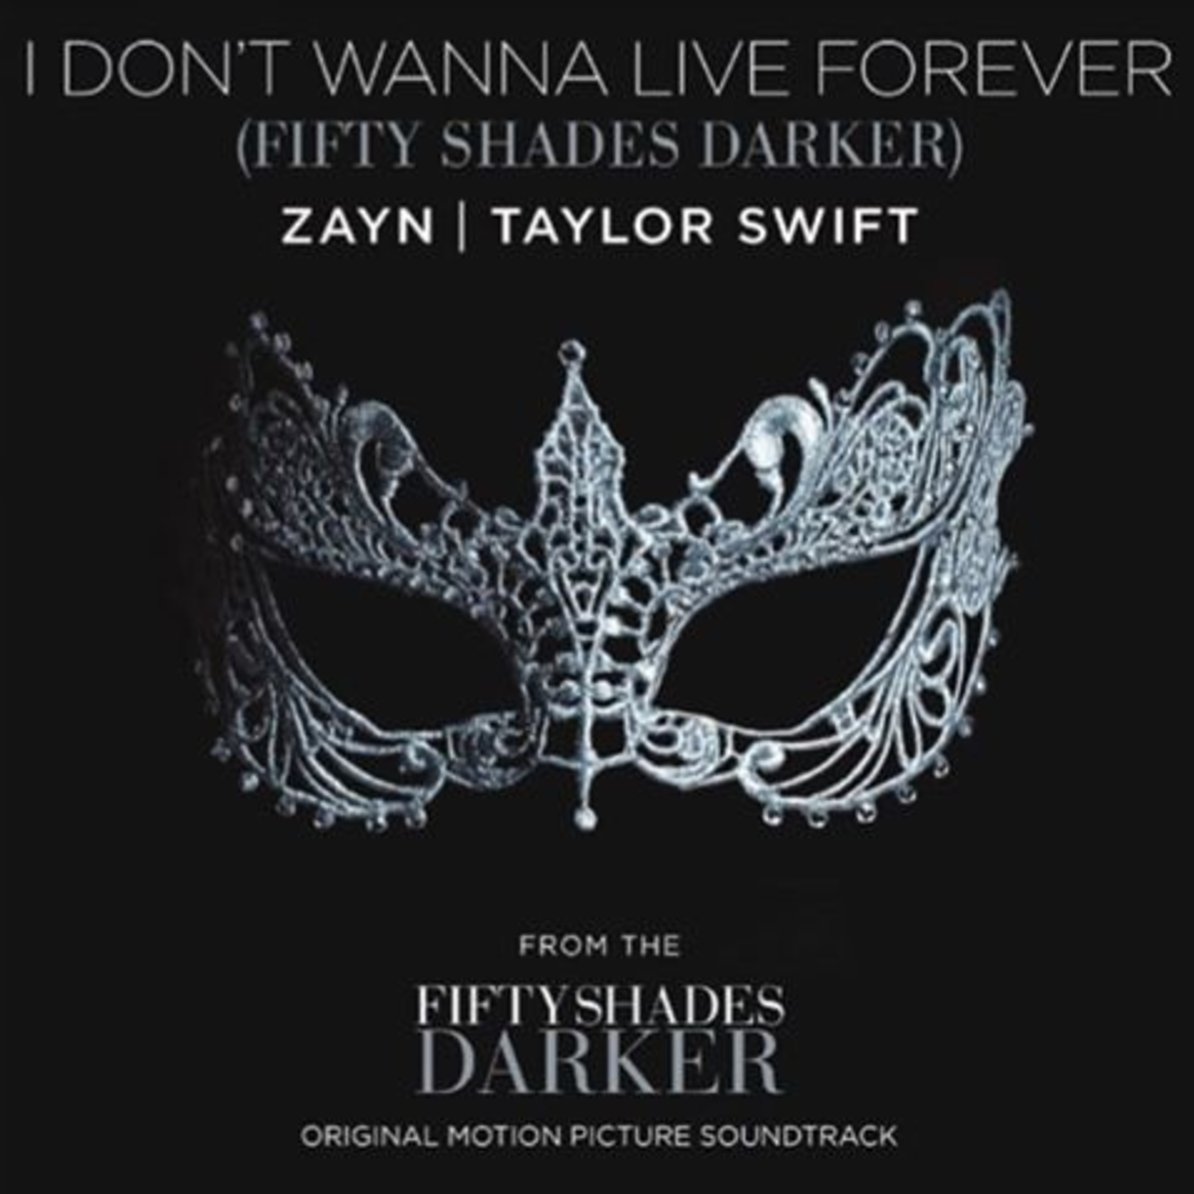 Taylor Swift And Zayn Malik Release Surprise Duet For Fifty Shades Darker Soundtrack Music